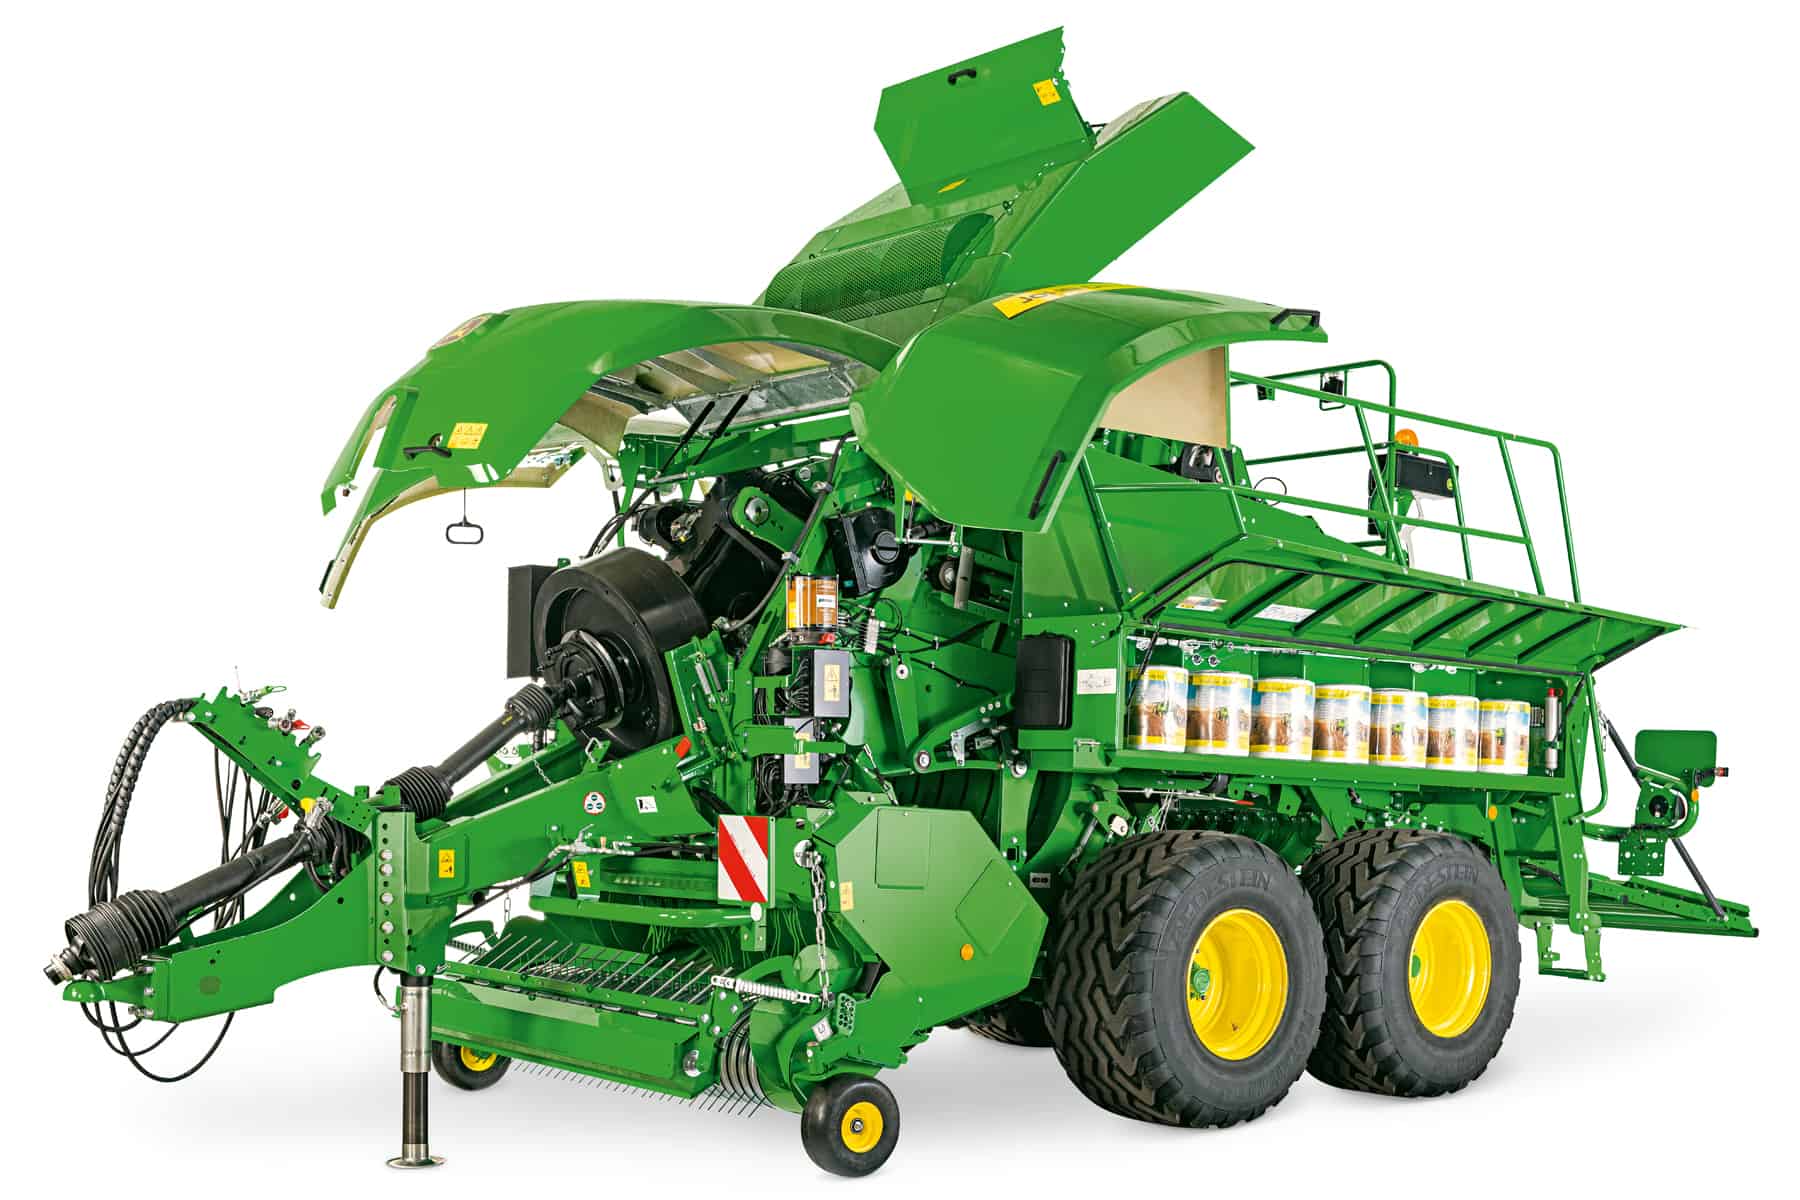 John Deere launches new large square balers